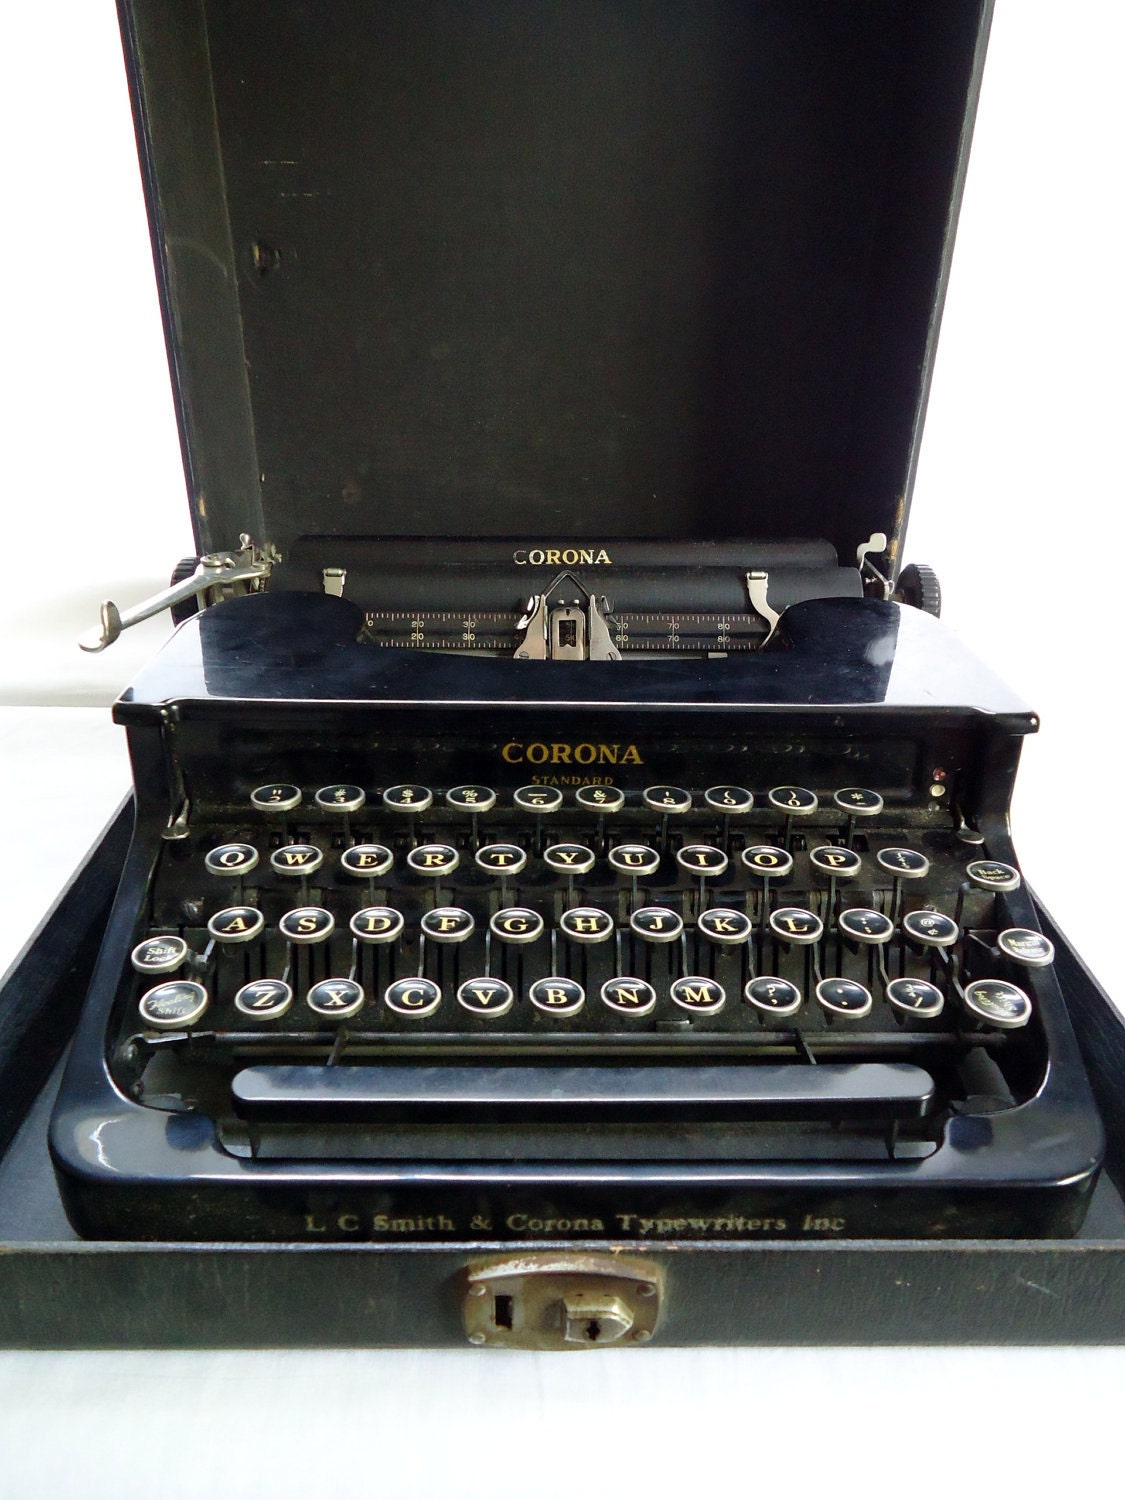 SALE Vintage Corona Standard Typewriter with by thescreenporch